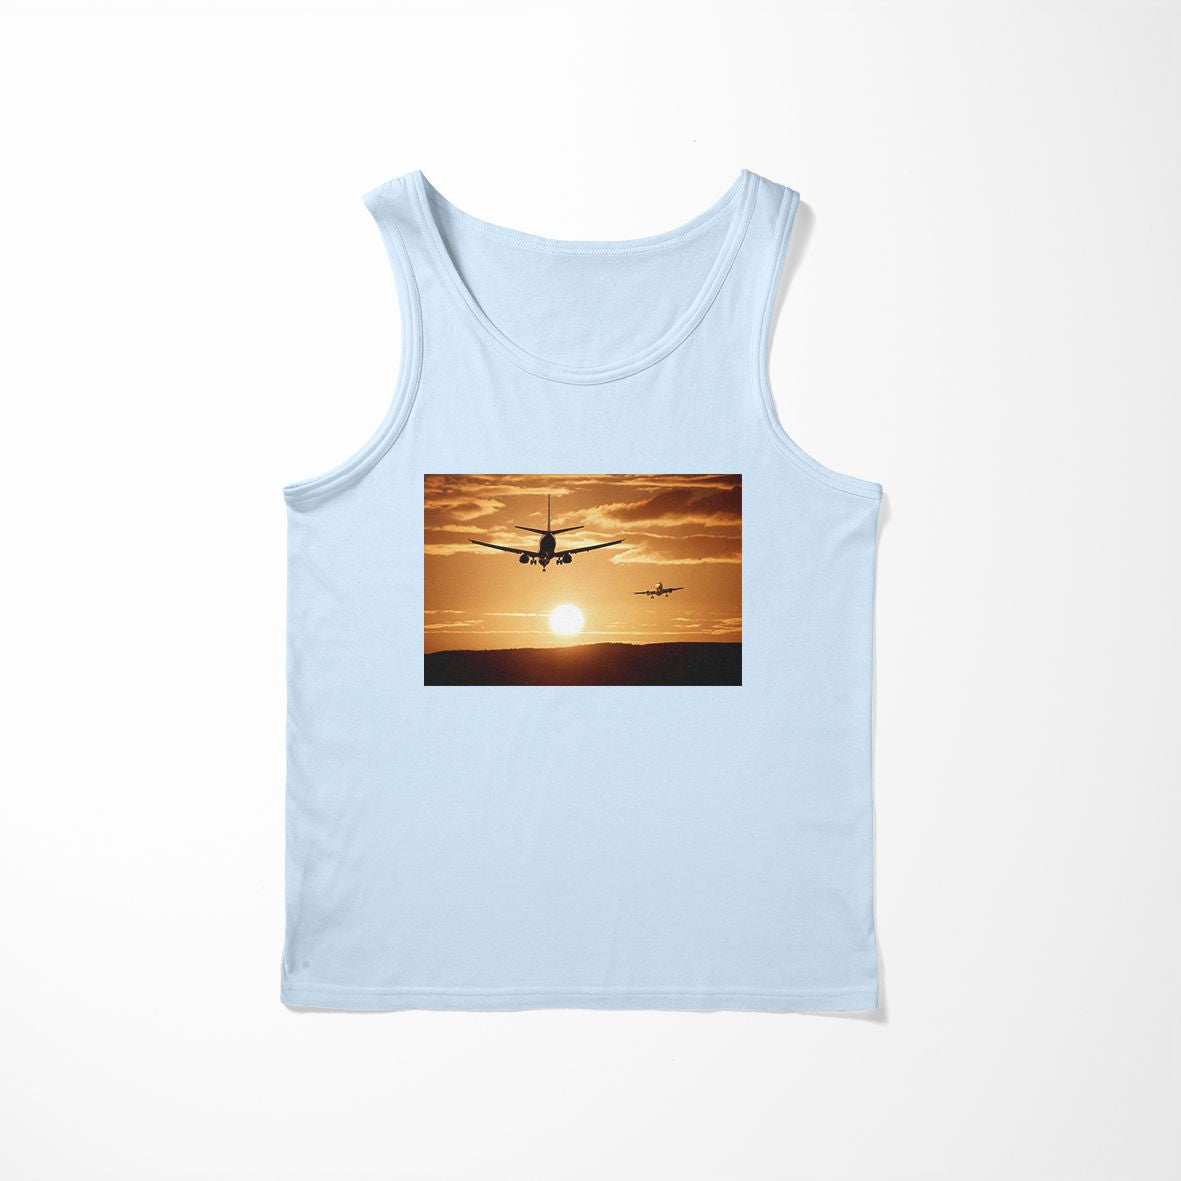 Two Aeroplanes During Sunset Designed Tank Tops